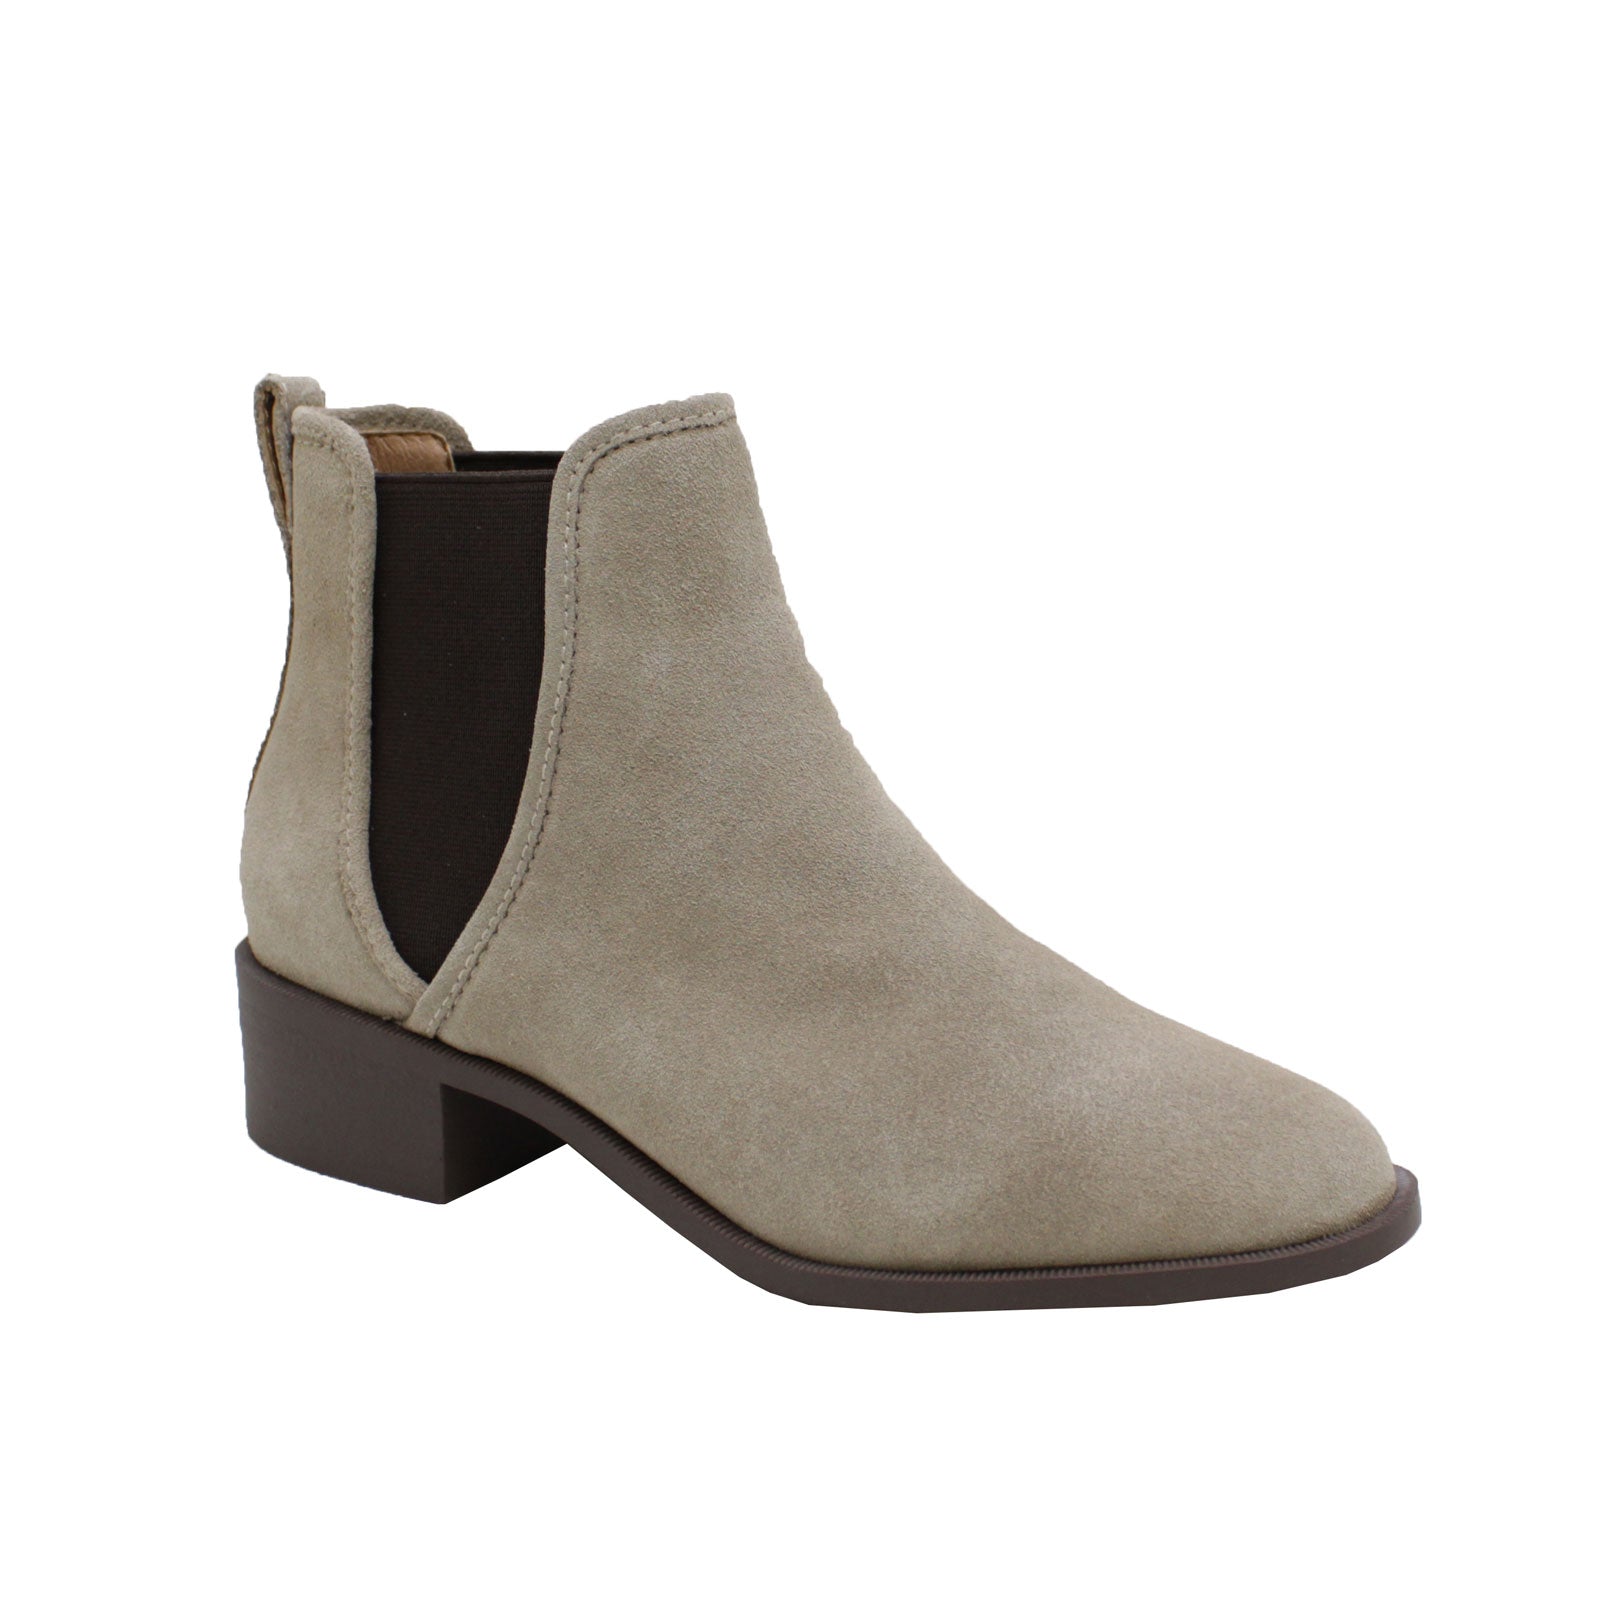 Steve Madden Dares Chelsea- Taupe Suede